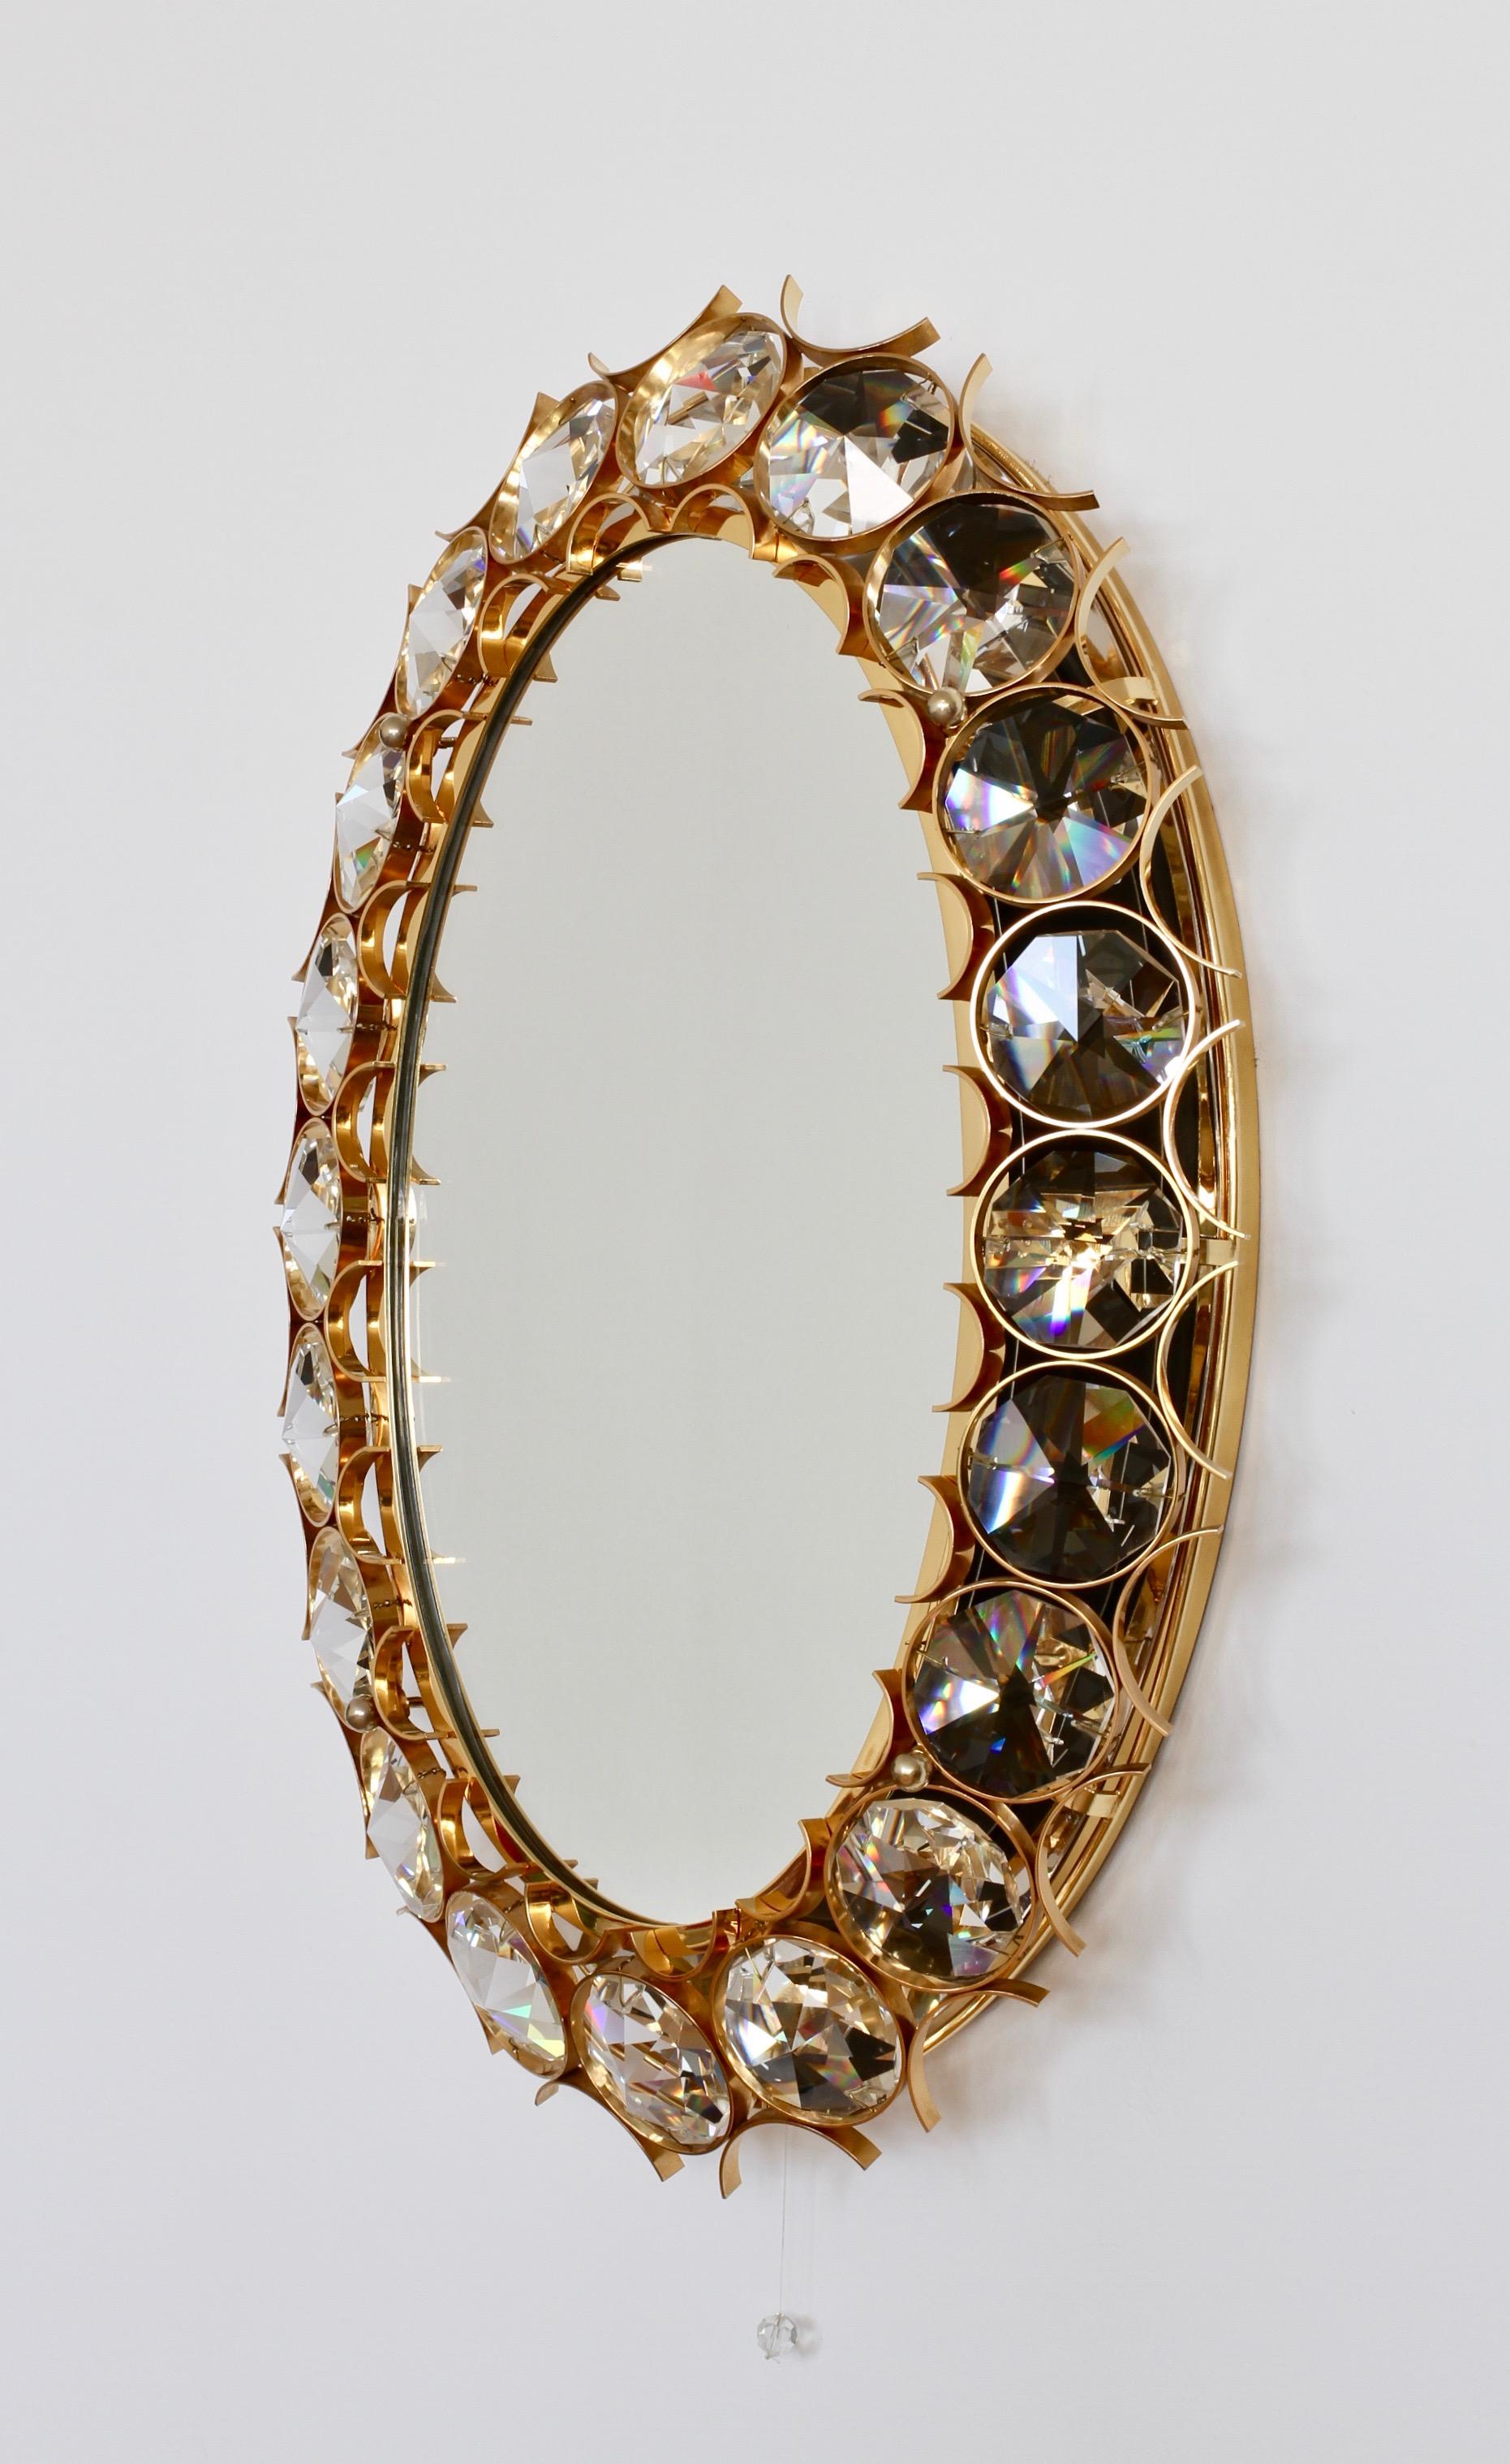 Stunning oval shaped mid-century gilt brass and crystal wall-mounted backlit vanity or hallway mirror by Palwa, Germany, circa 1965-1975. Perfect for the Hollywood Regency style, there is no better combination than gold and crystal for the opulent,